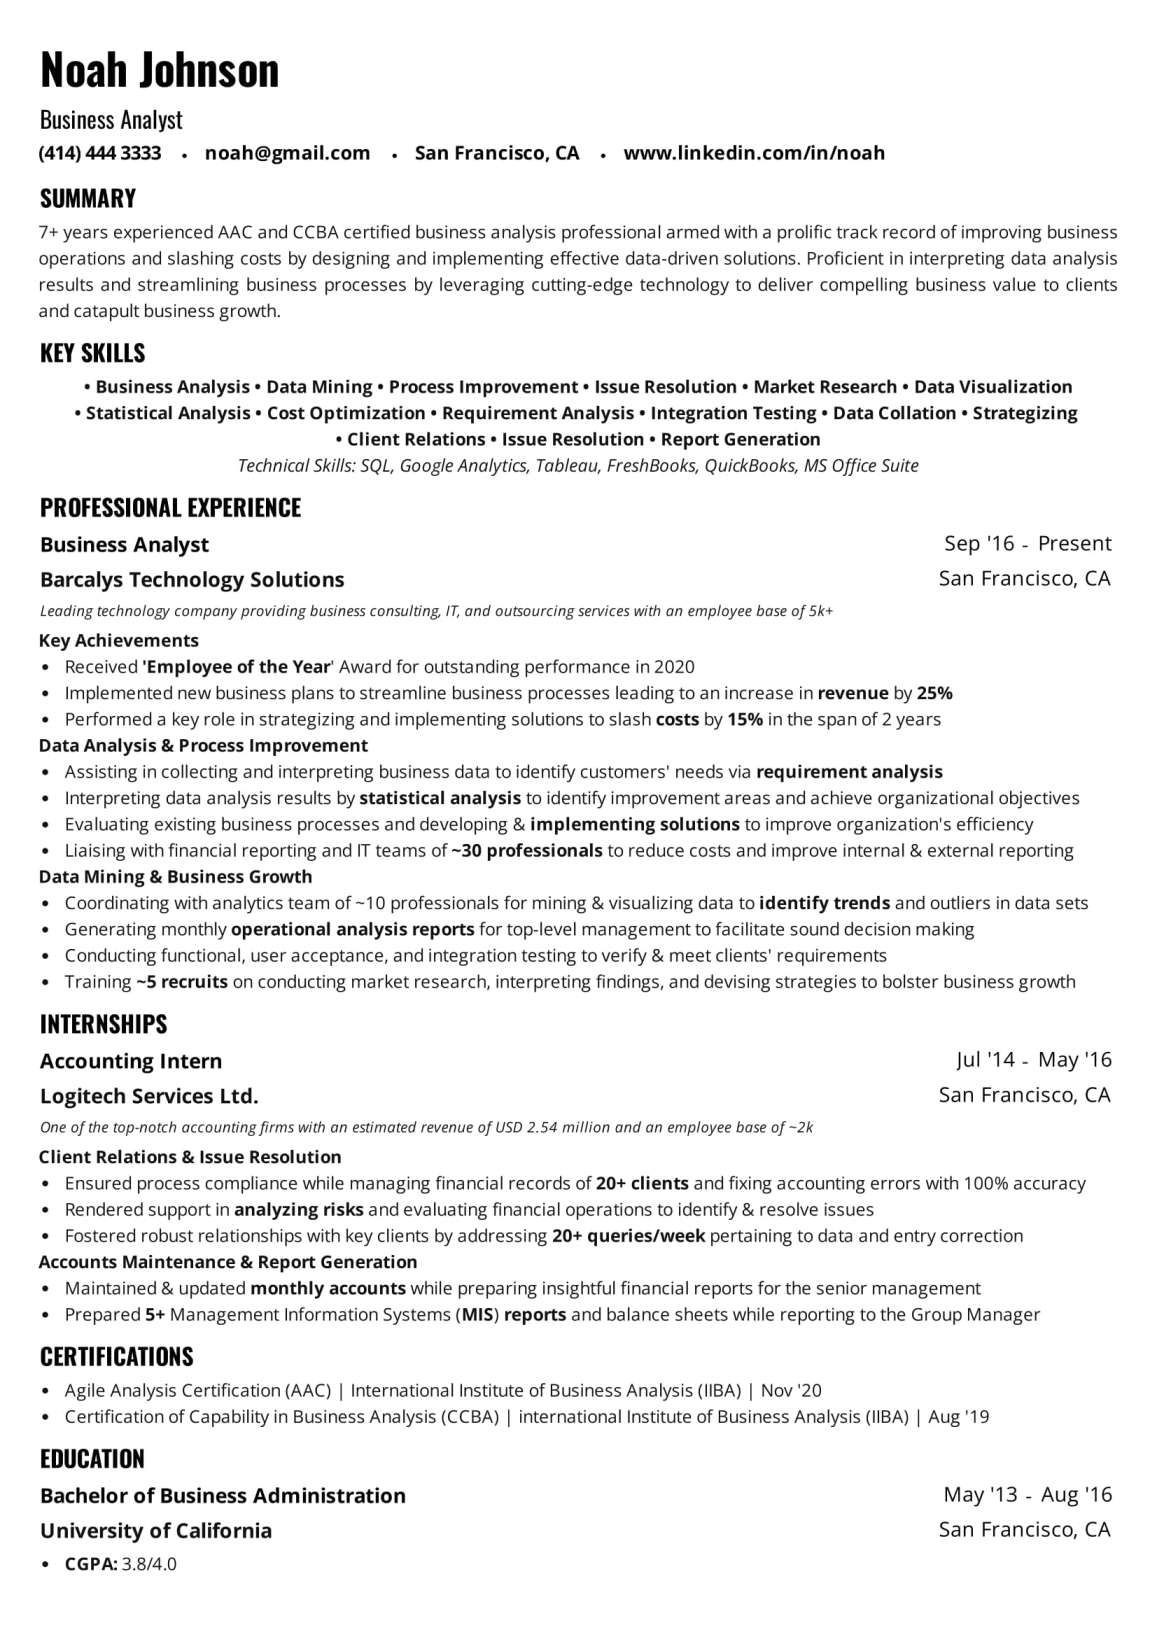 Resume Summary Samples for Business Analyst Business Analyst Resume: 2022 Guide with 20lancarrezekiq Examples & Samples